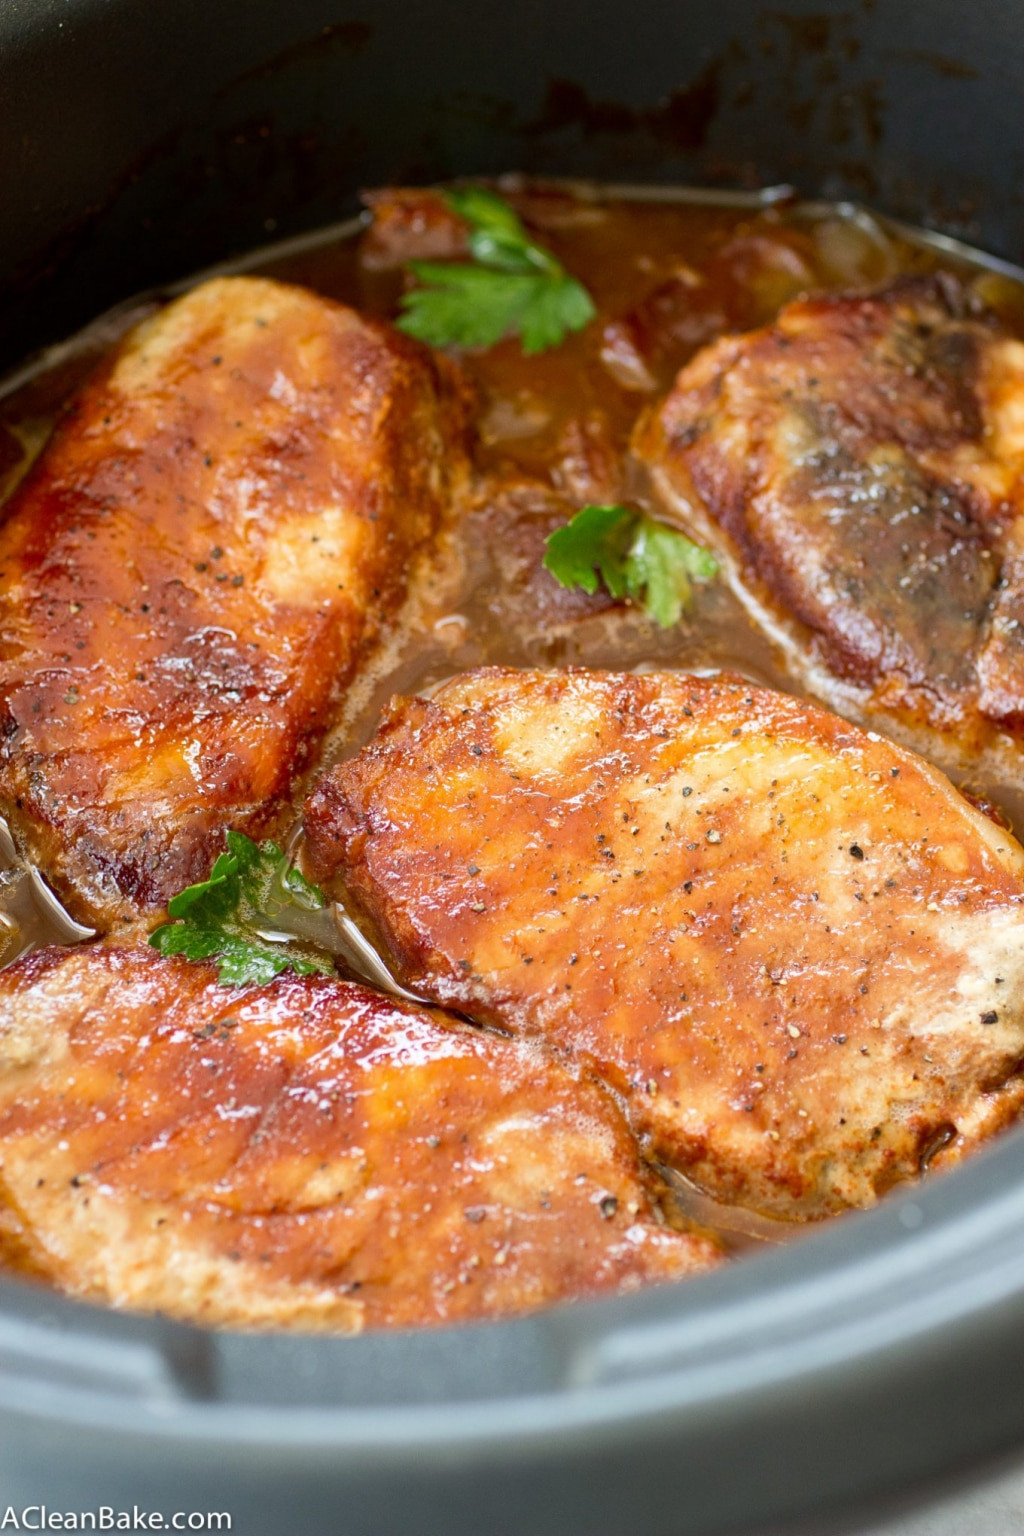 Recipes For Pork Chops
 Crockpot Pork Chops with Apples and ions Gluten Free